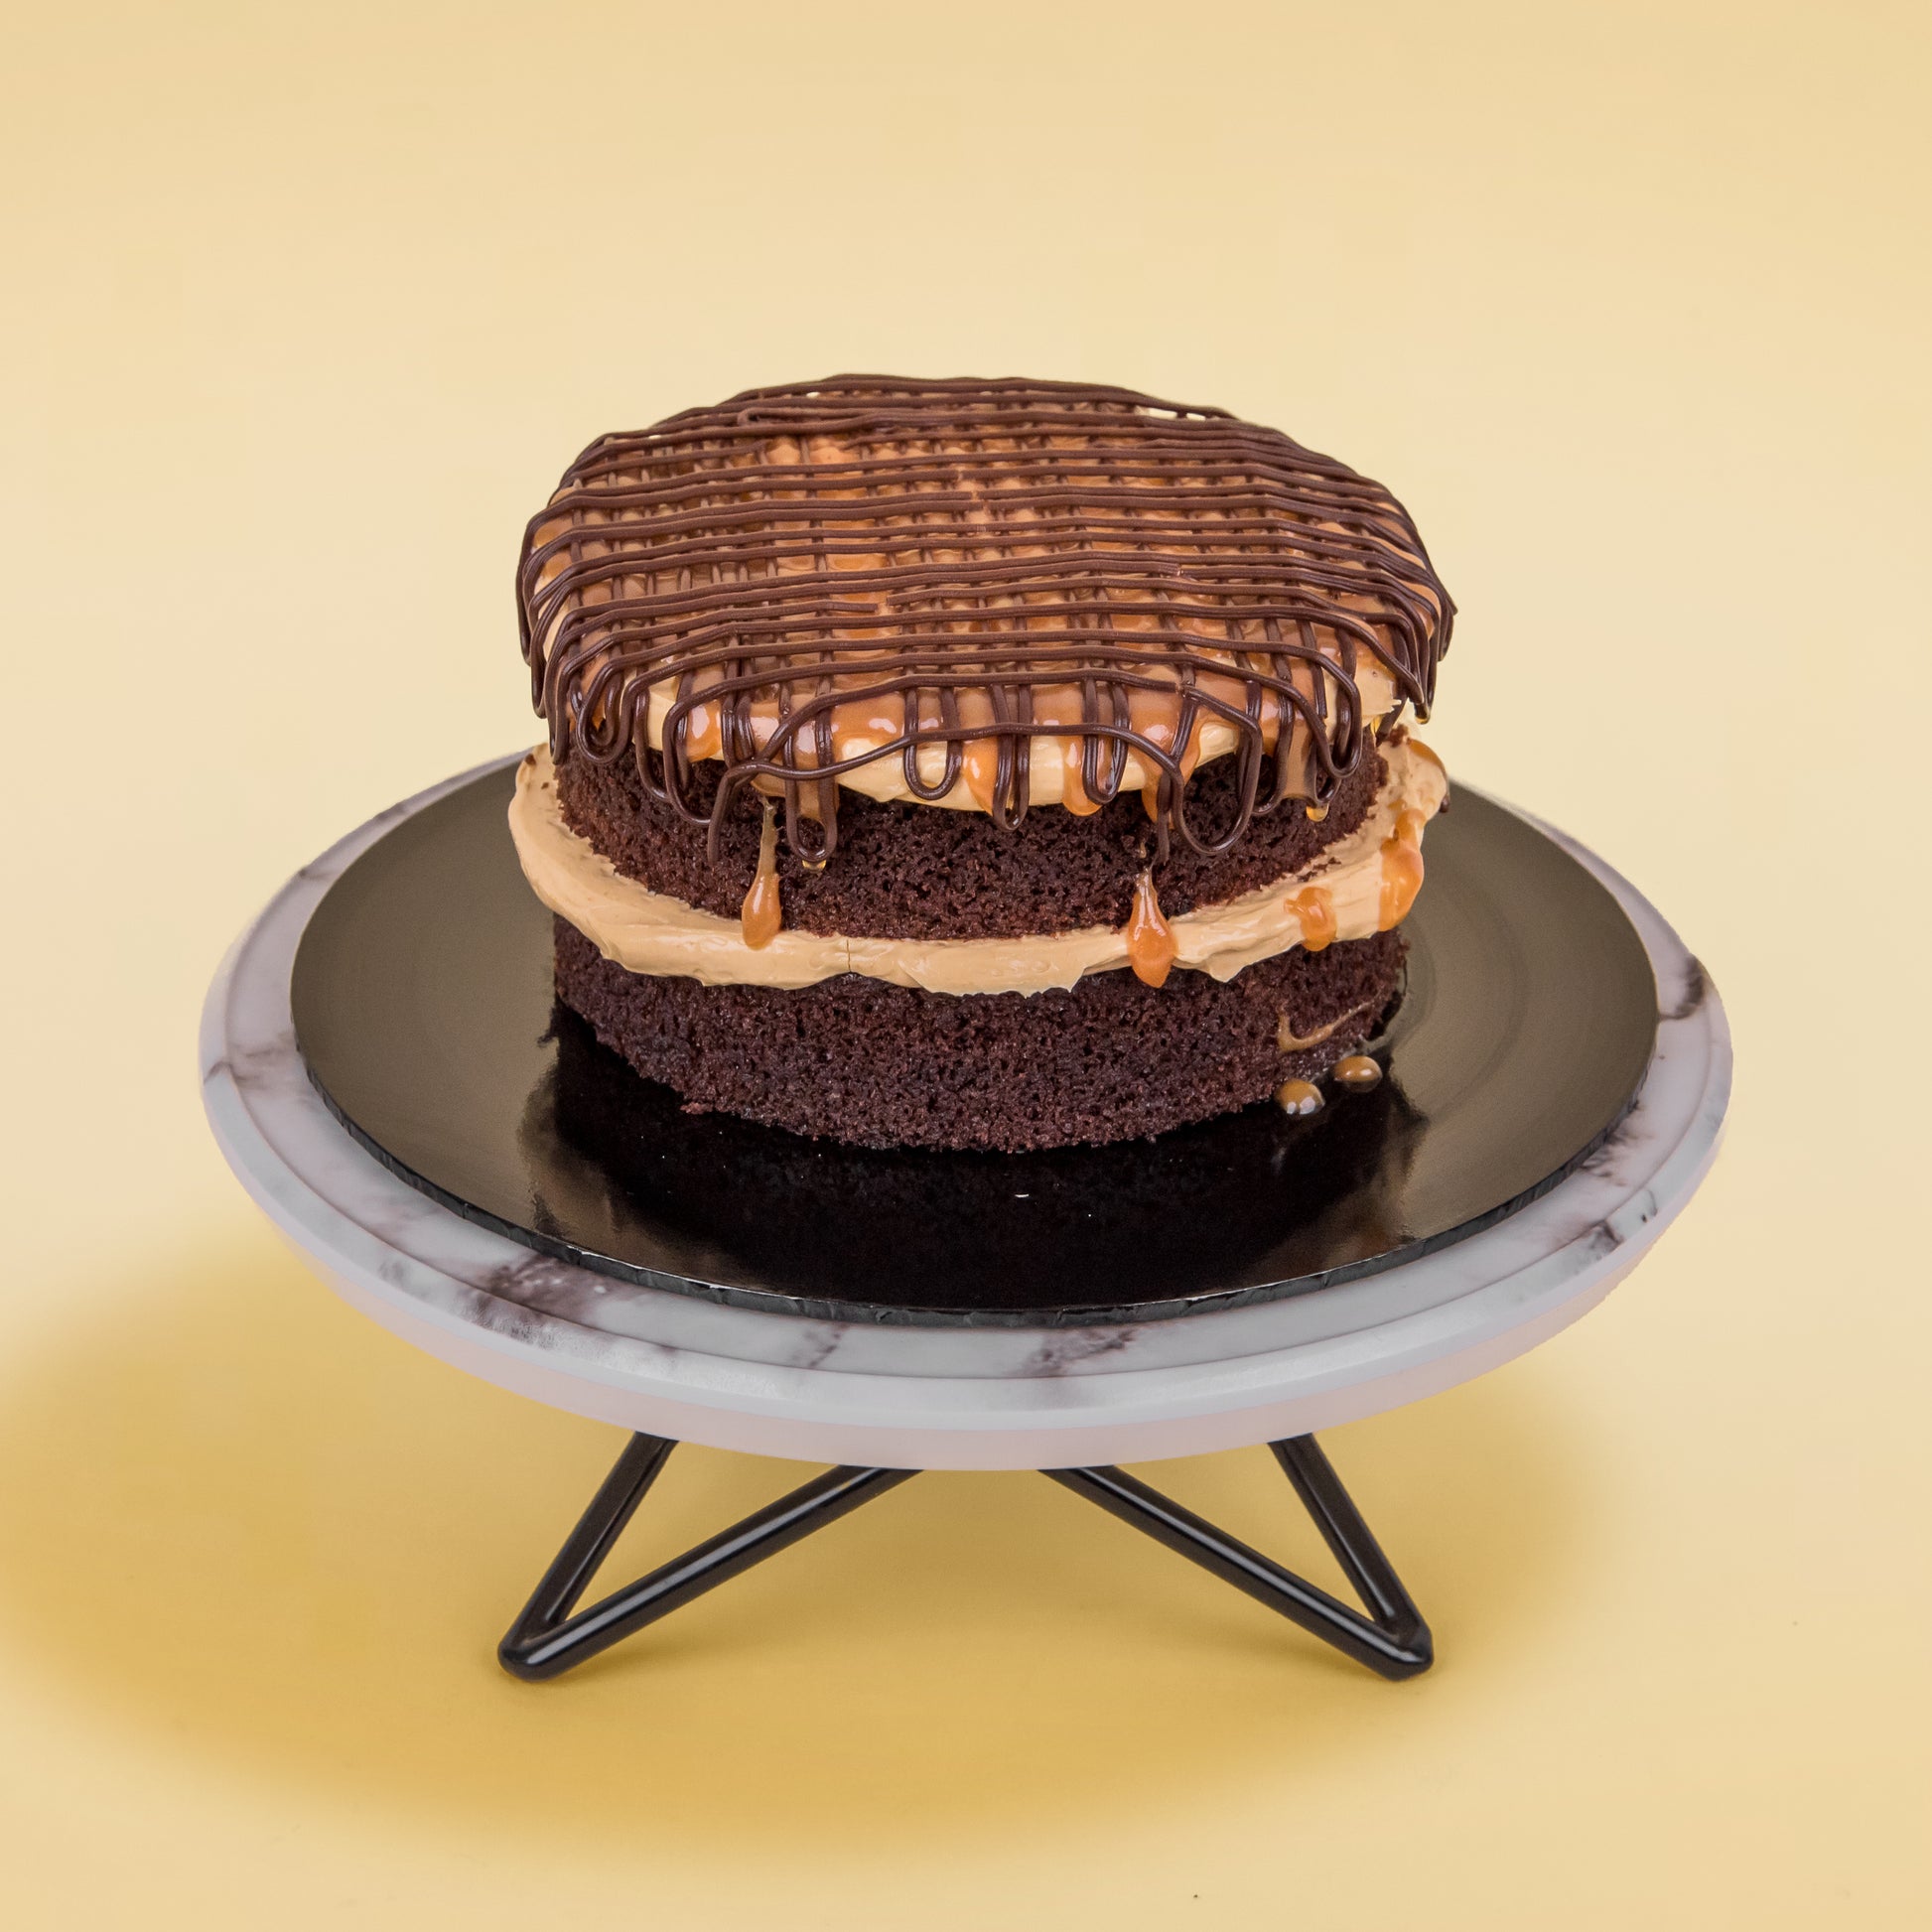 Top view of Mini Salted Caramel Chocolate Cake with Chocolate & Salted Caramel Drizzle On Top by Elevete Patisserie